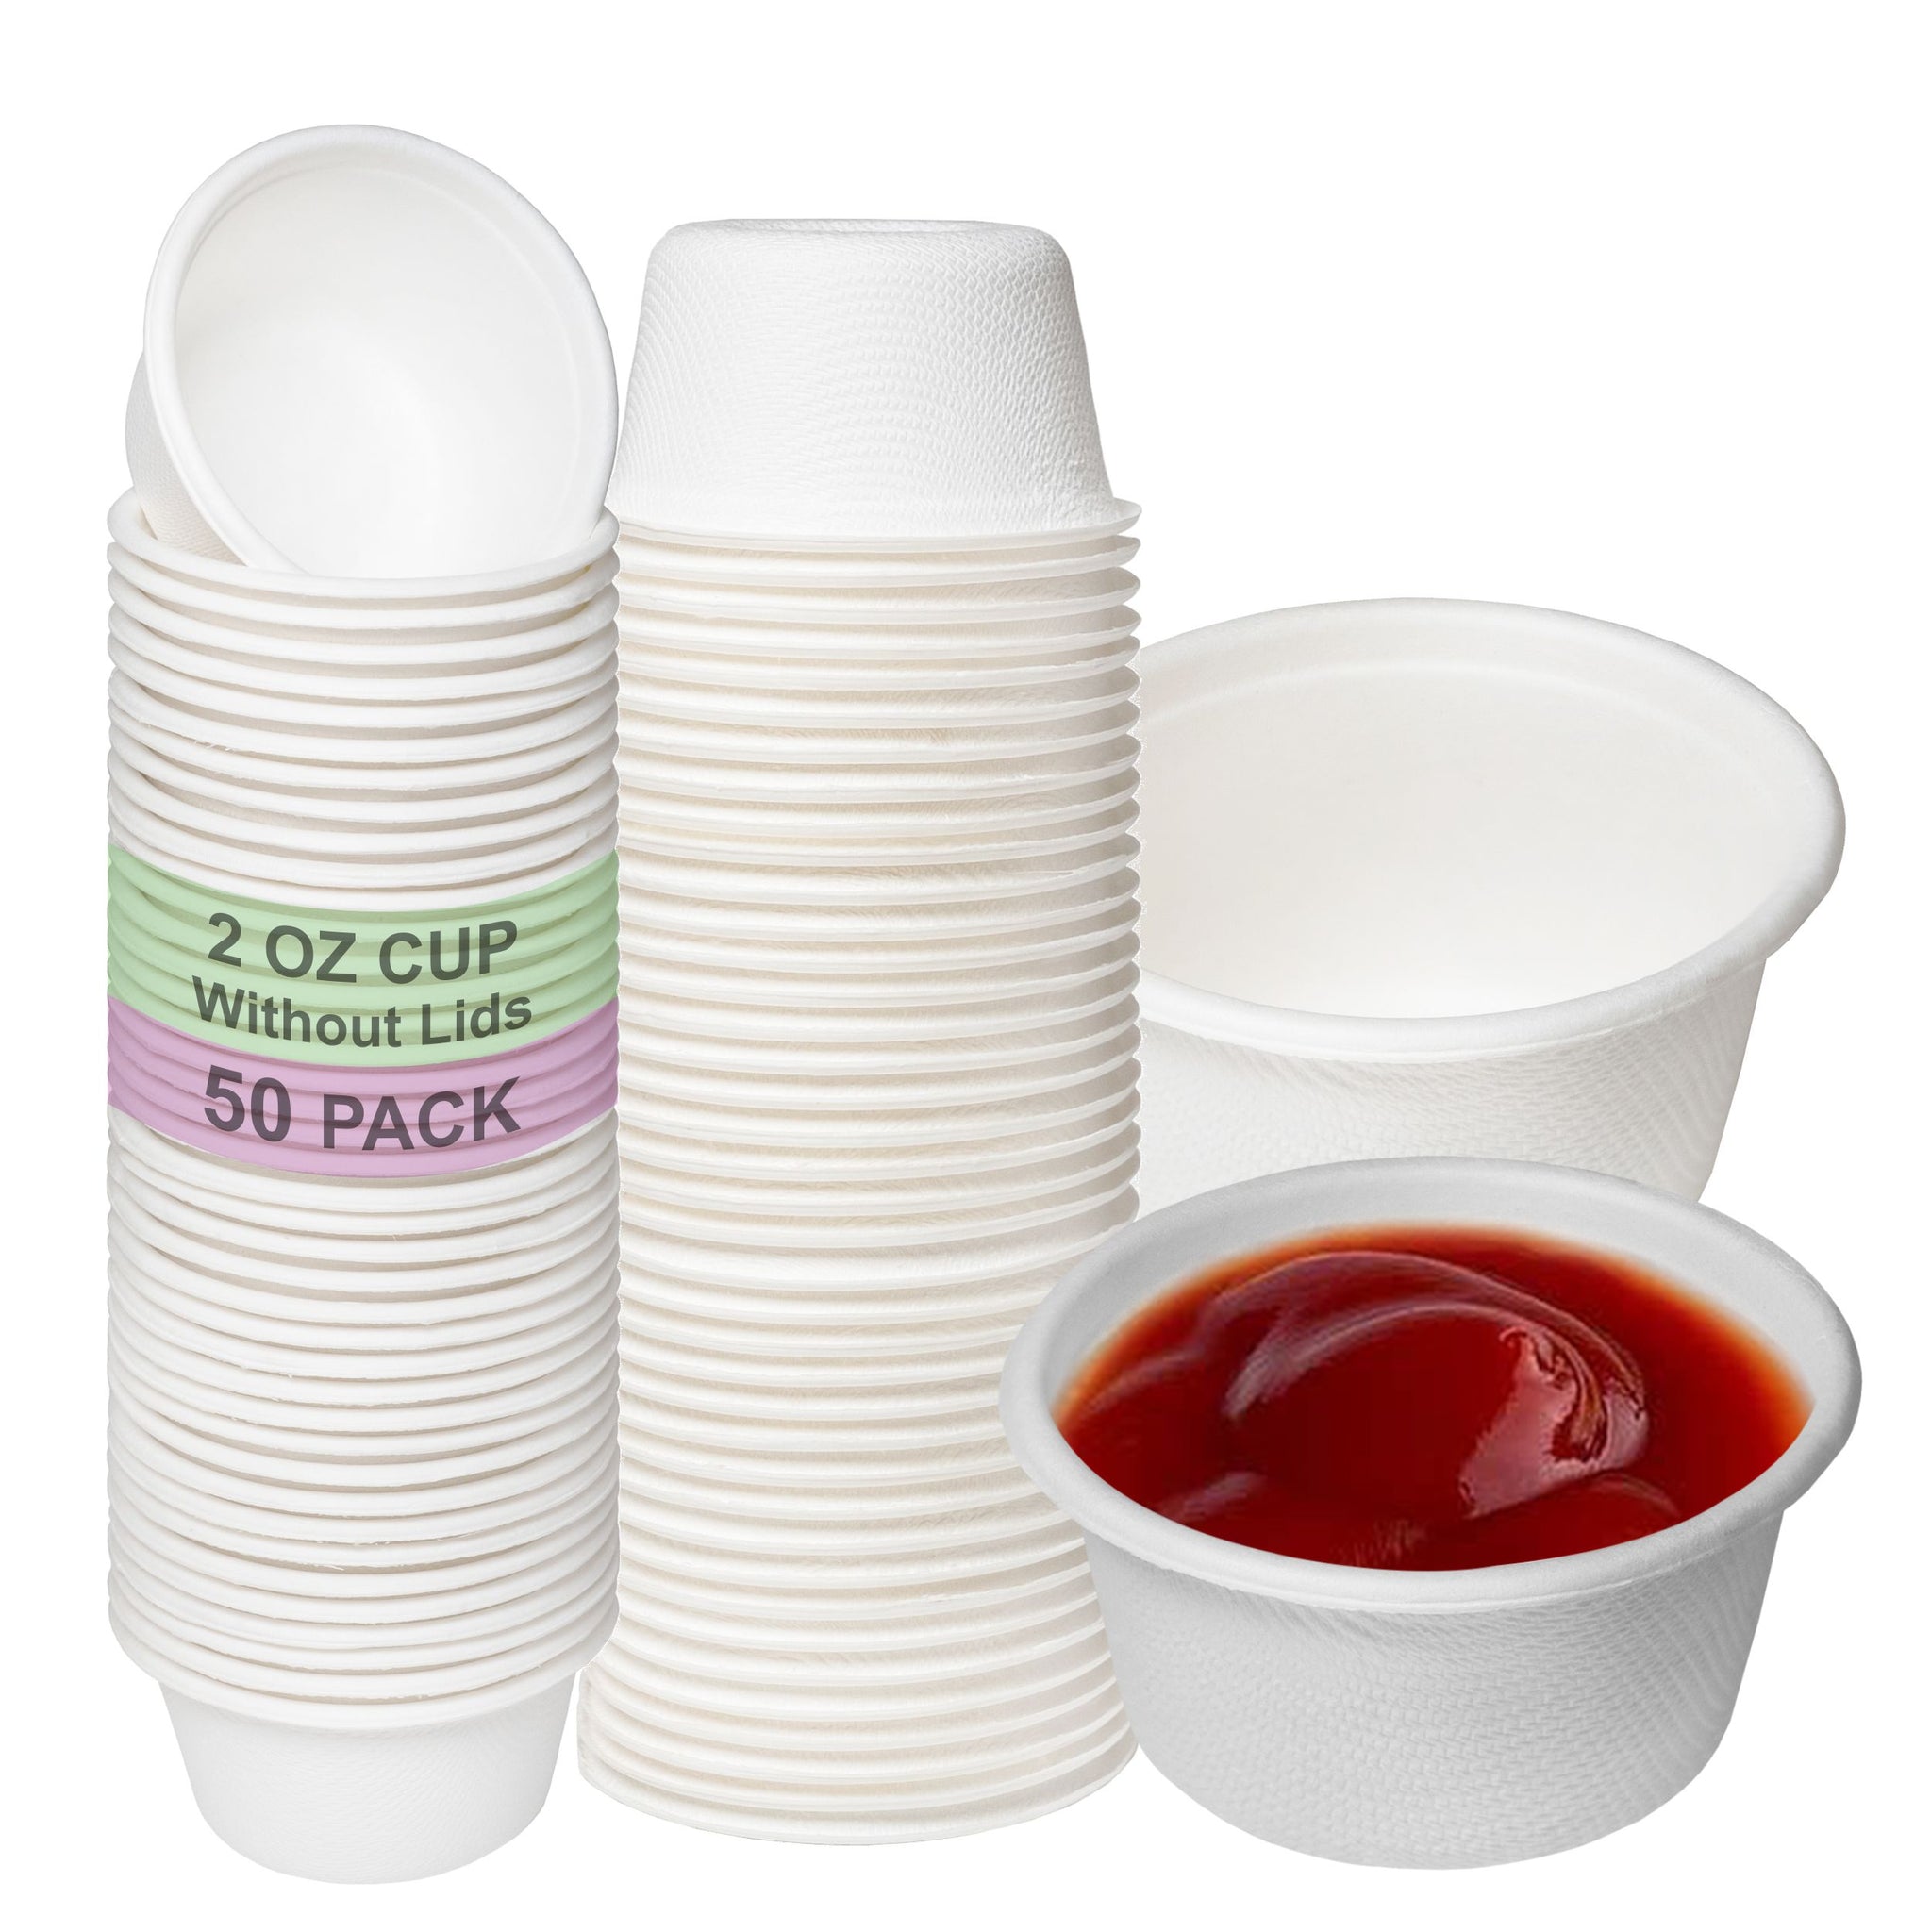 white  travel size cup  to go take out delivery  souffle  smallpapercups  shotcups  servingcups  Sauce Cups  samplecups  Salad Dressing  restaurant fast food  Portion Dipping Cups  pillcup  papercups  Paper Ice Cream Cups  mouthwash cups  medicinecup  Measuring Cups  leakproof  Leak Resistant  ketchup Cups  jello shot slime  Food Storage  DIYpapercups  disposableshot  Disposable Portion Cups  condiment cups  Compostable  Bagasse  artsandcraft  2 ounce cup